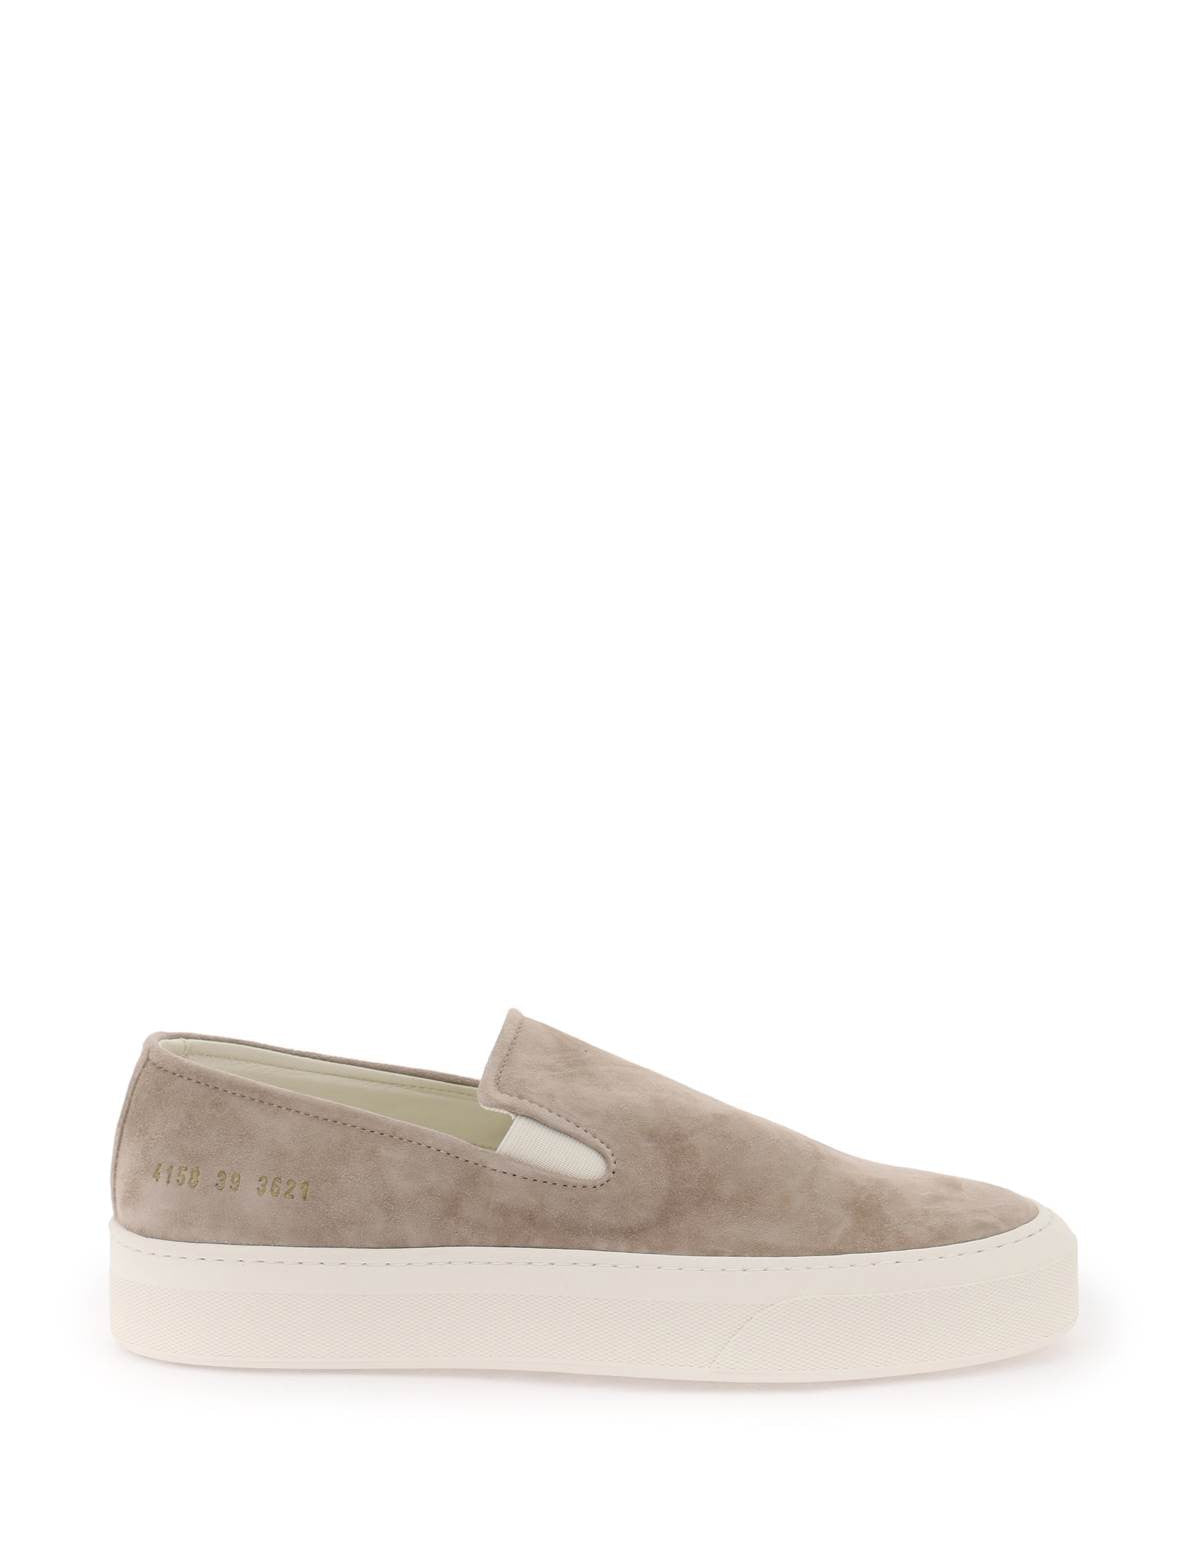 common-projects-slip-on-sneakers_266c93c8-ee86-48ad-8d3a-4d8ae75b99b0.jpg